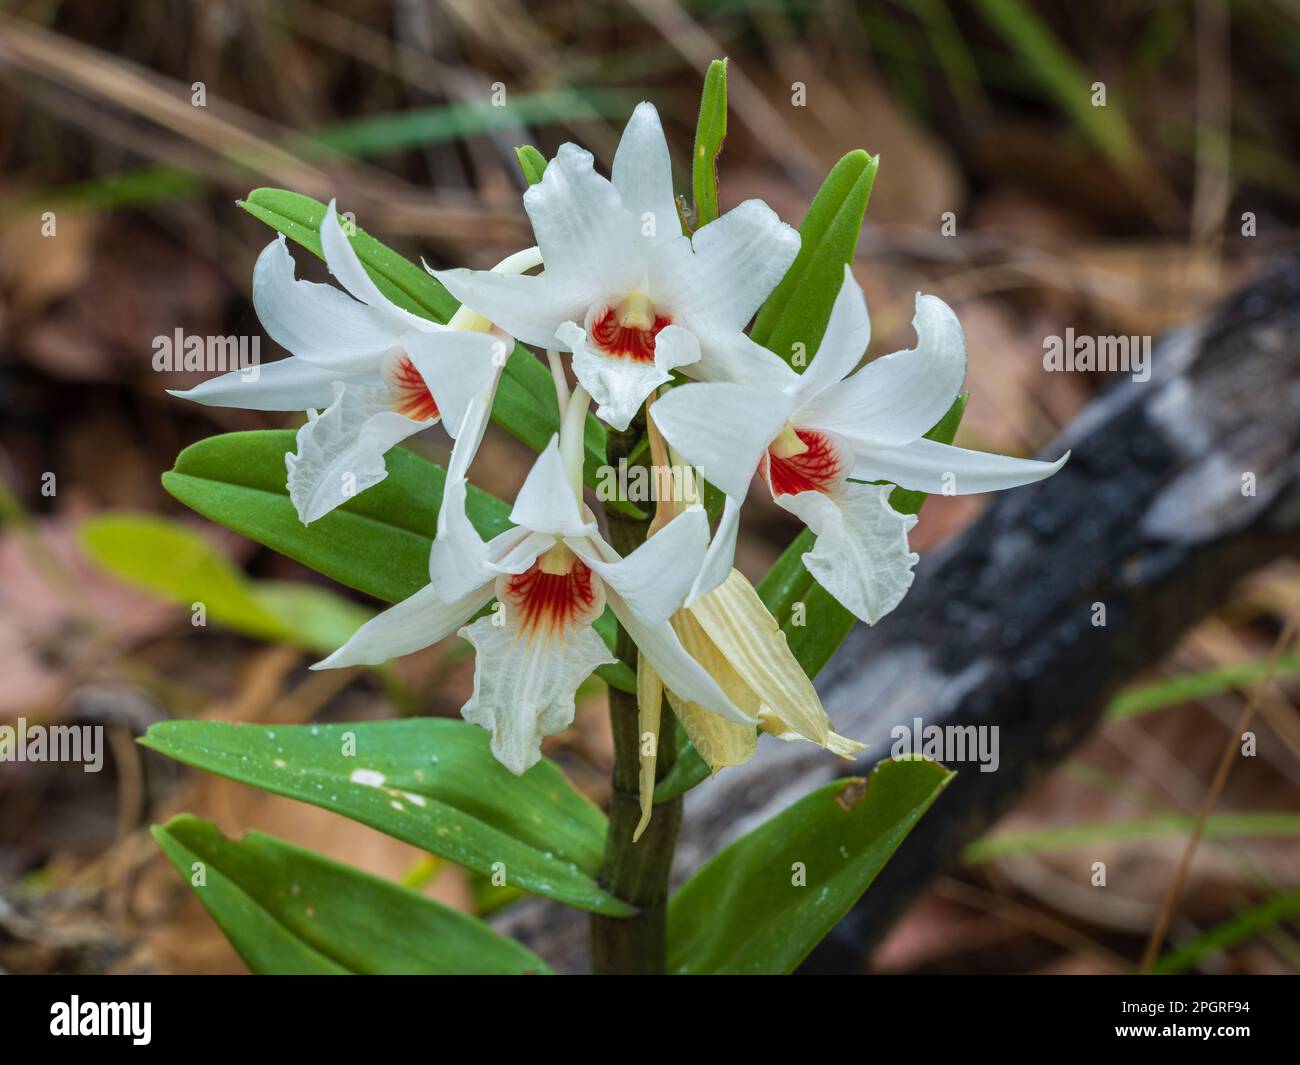 Closeup view of bright white and orange red flowers of dendrobium draconis epiphytic orchid species blooming outdoors in tropical forest, Thailand Stock Photo